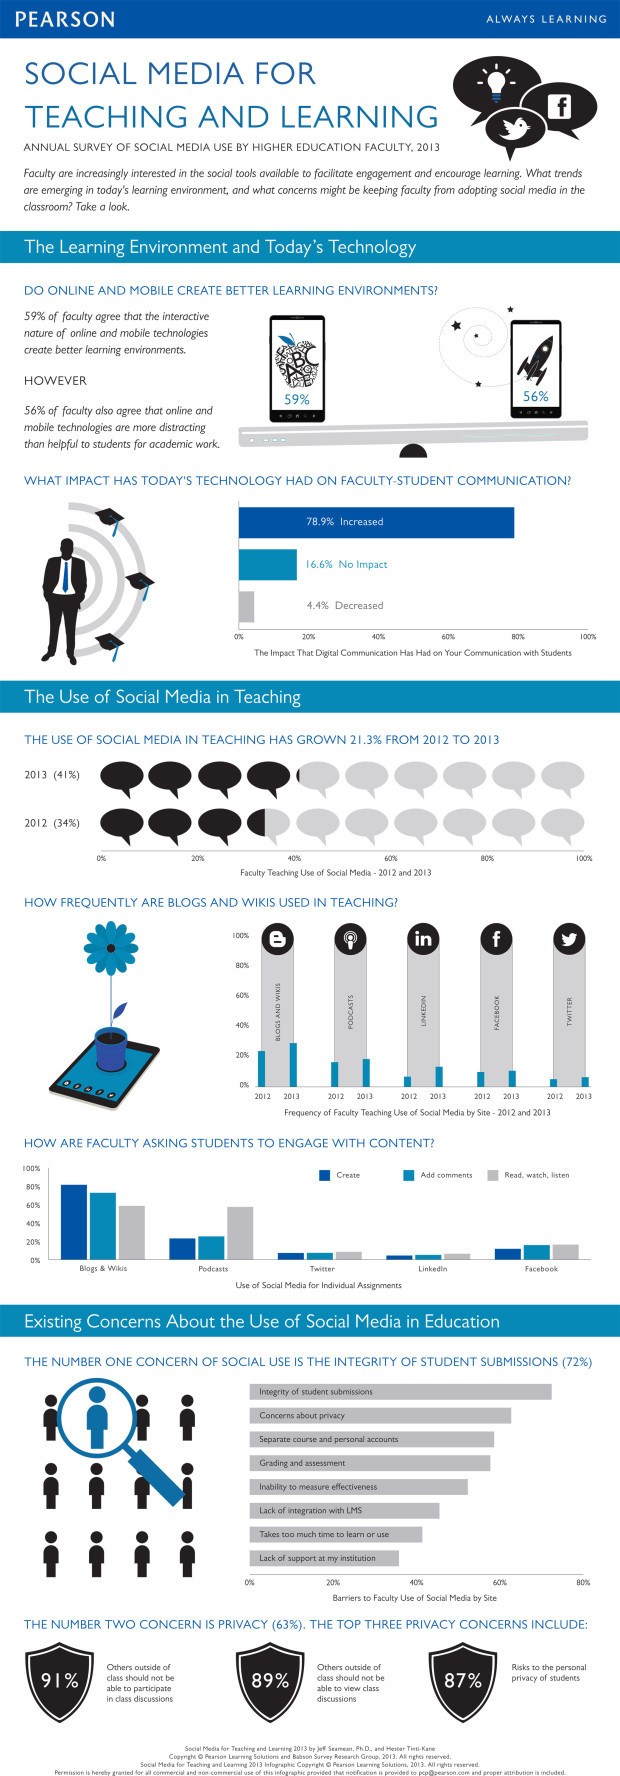 Social Learning in Higher Education 2013 Infographic Plus 8 Social Learning Guides